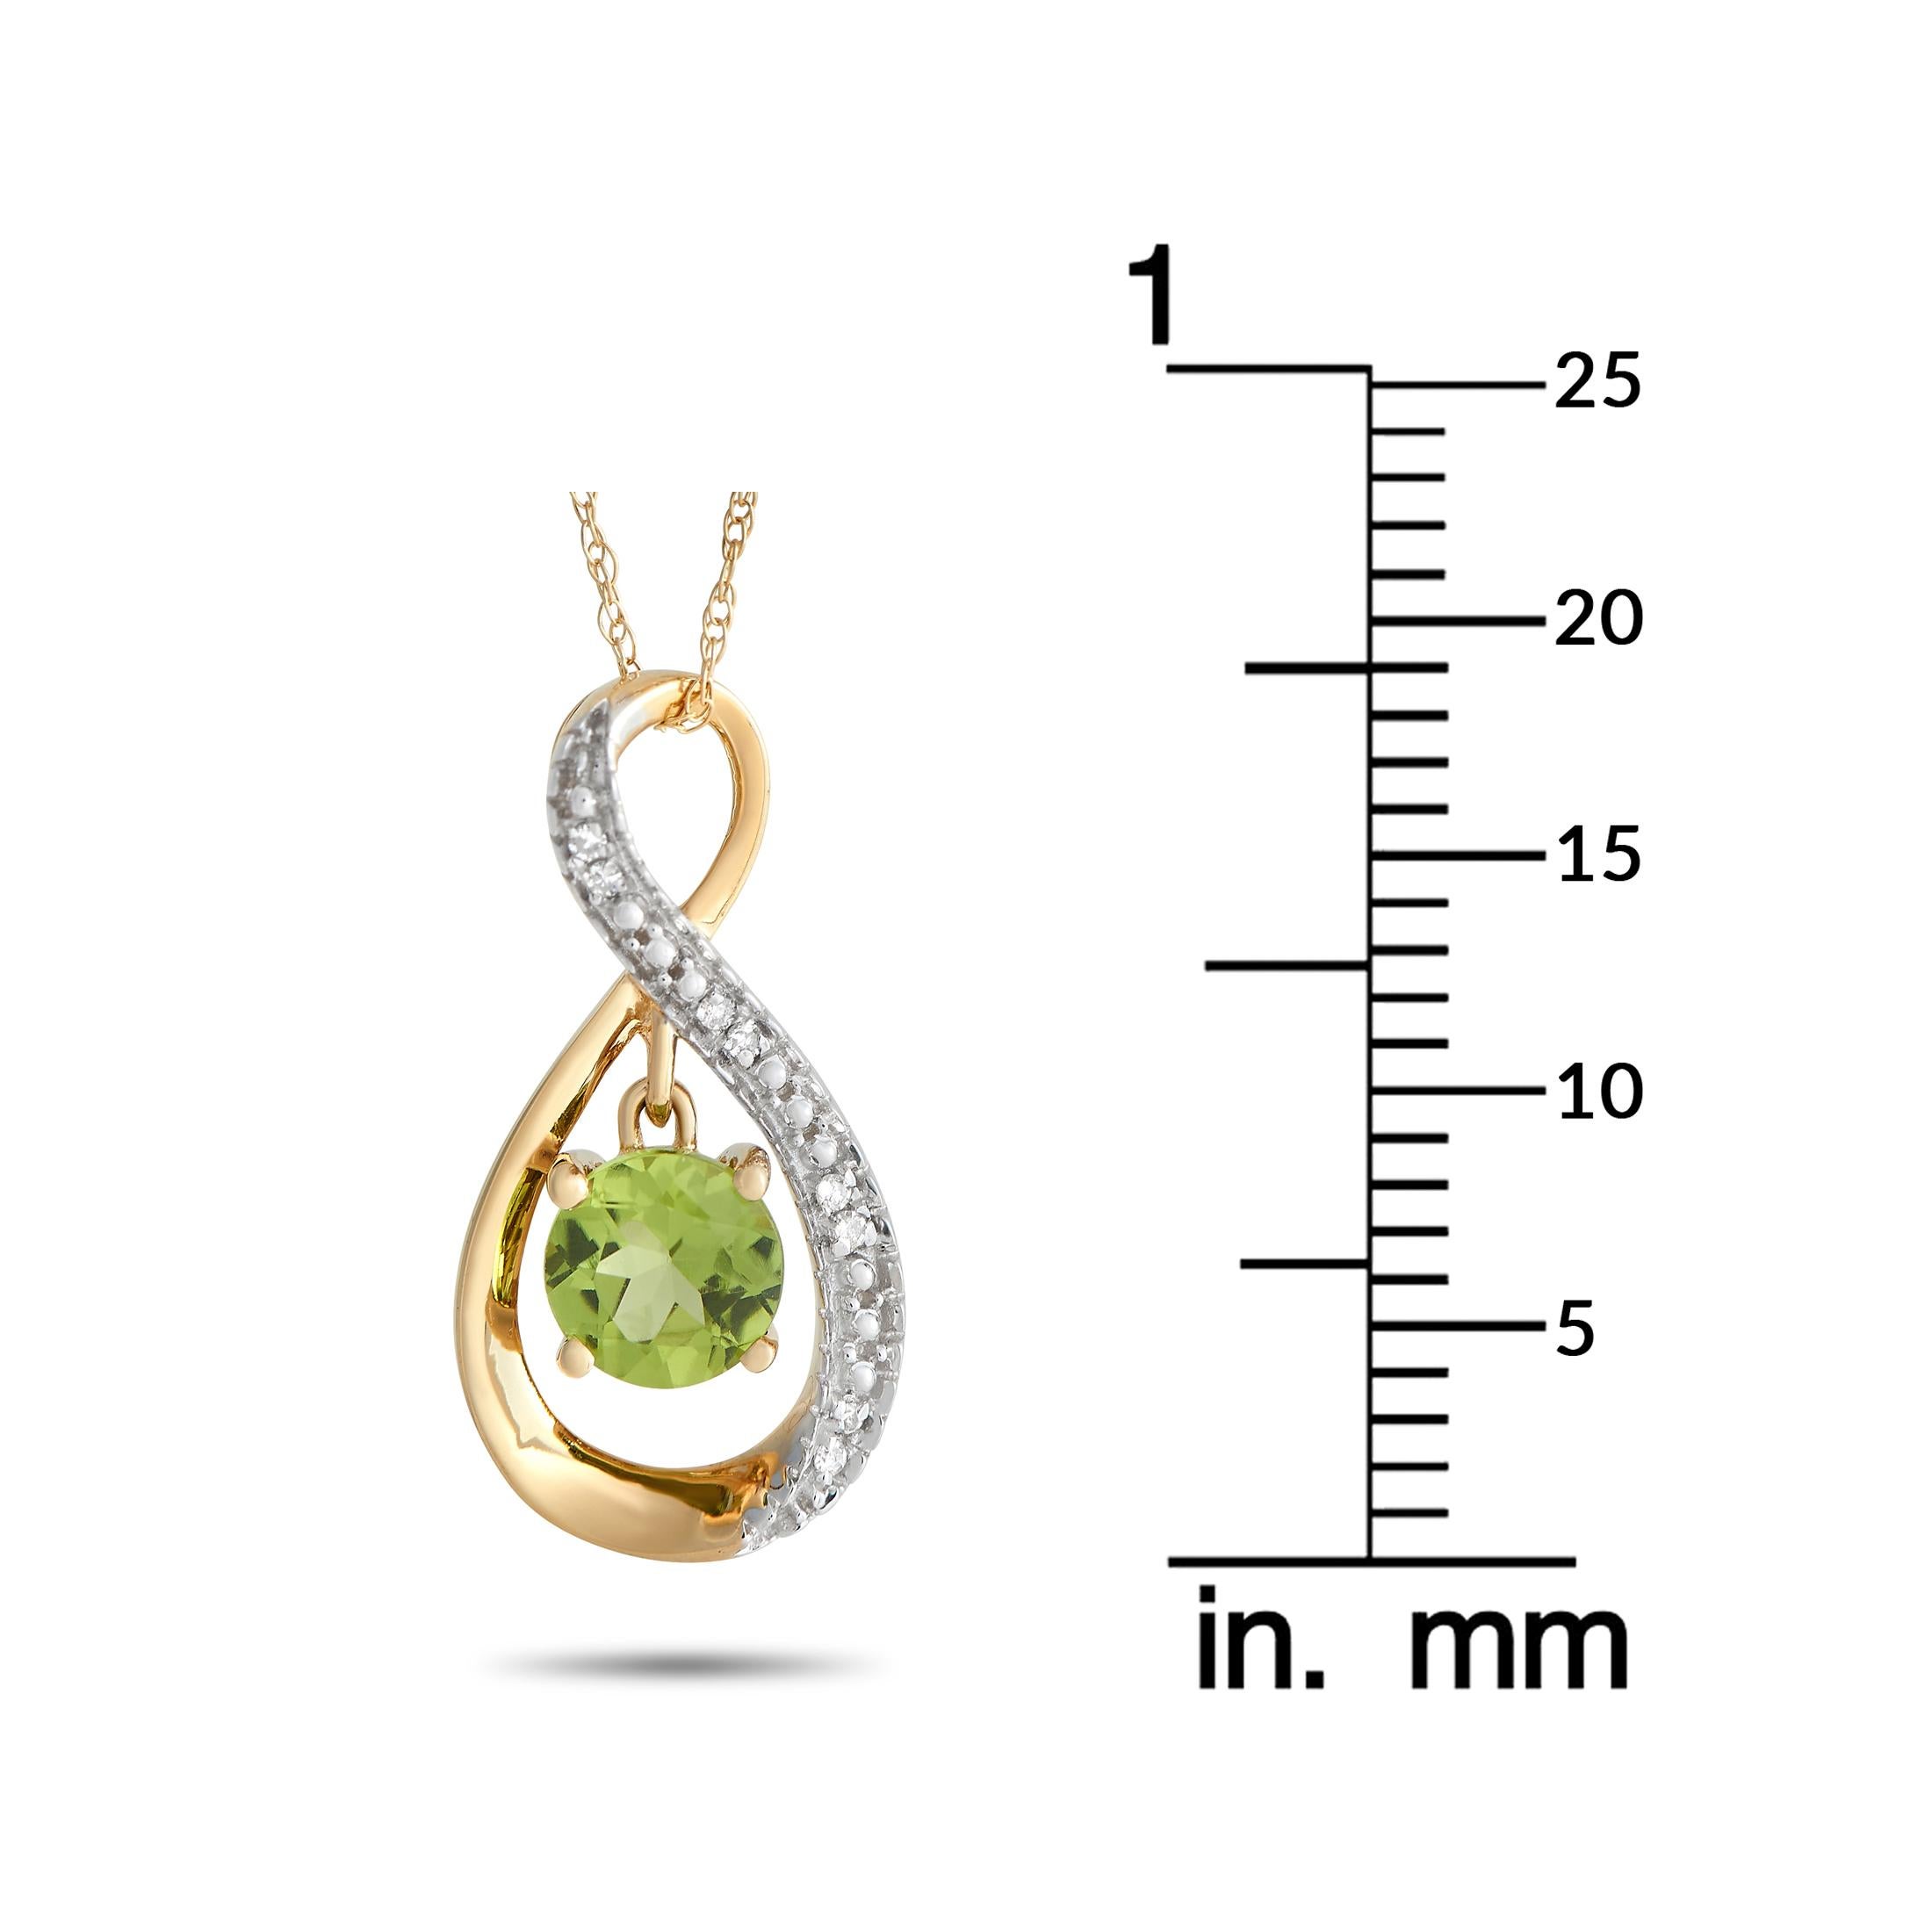 LB Exclusive 14K Yellow Gold 0.03 ct Diamond and Peridot Necklace In New Condition For Sale In Southampton, PA